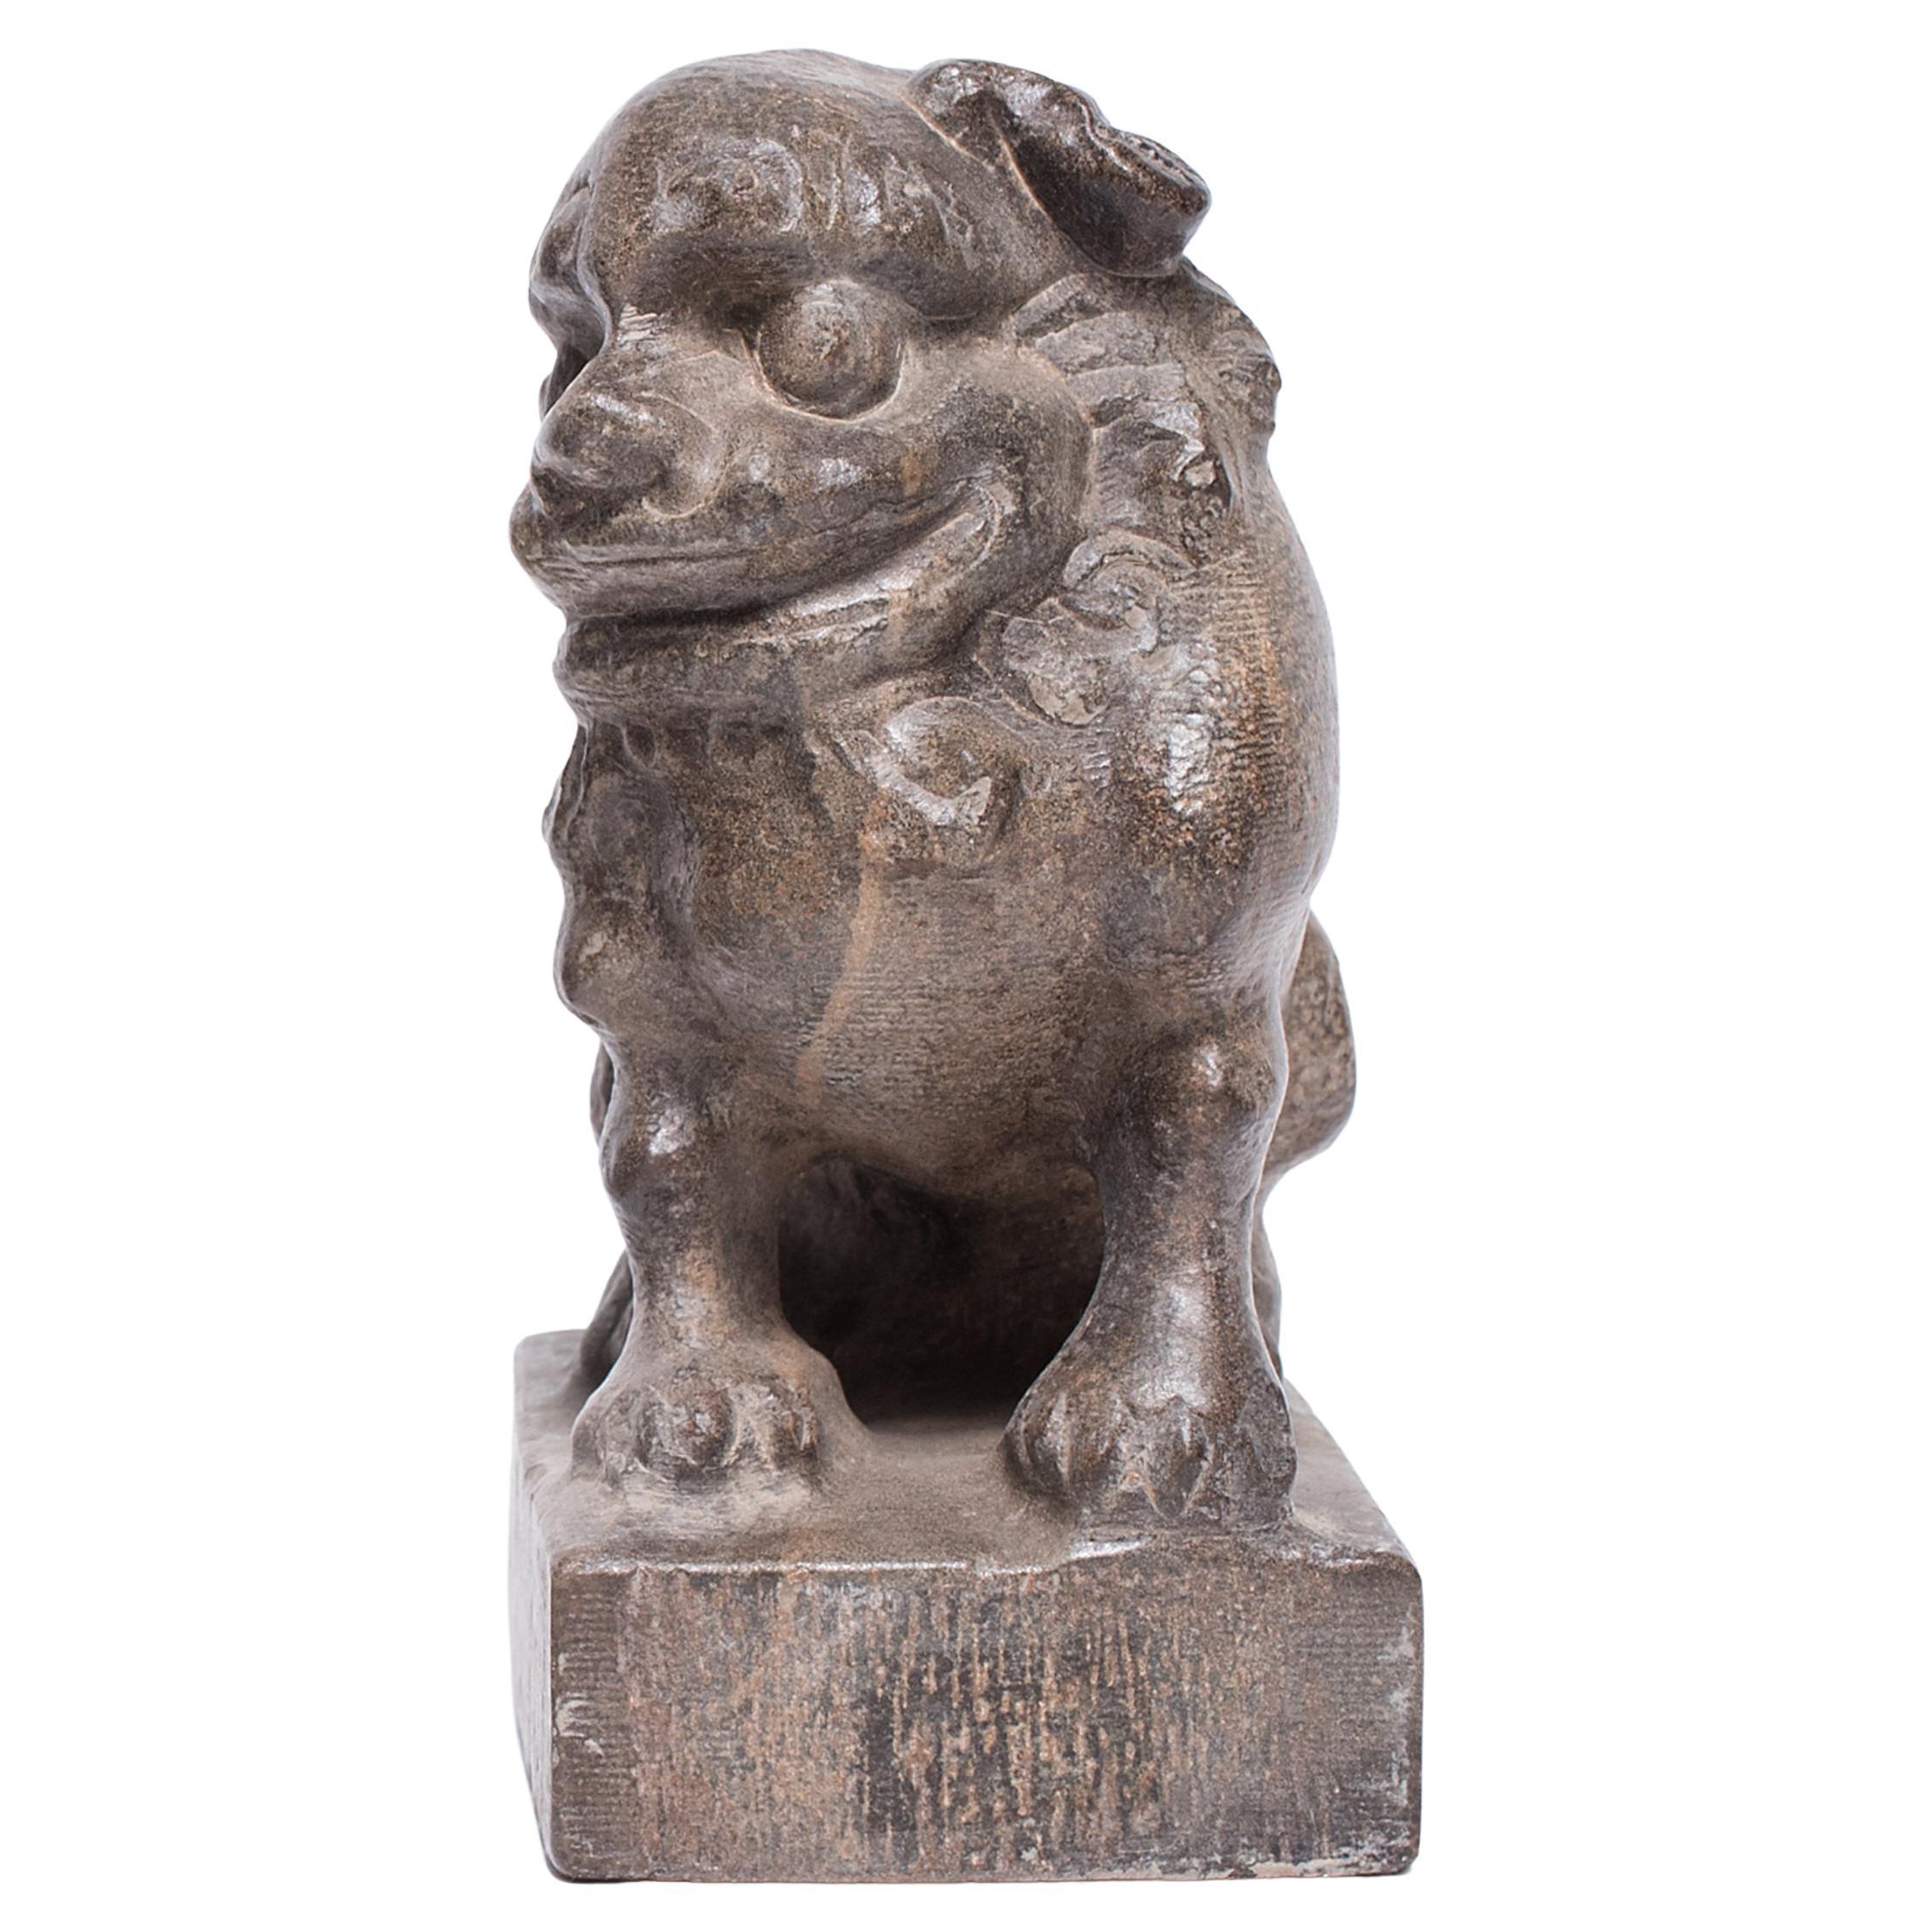 With a curly mane and a lively expression, this petite stone fu dog is an adorable companion and a benevolent guardian of the home. Known as shizi, the mythical dog is thought to offer protection from malevolent spirits and misfortune. A miniature